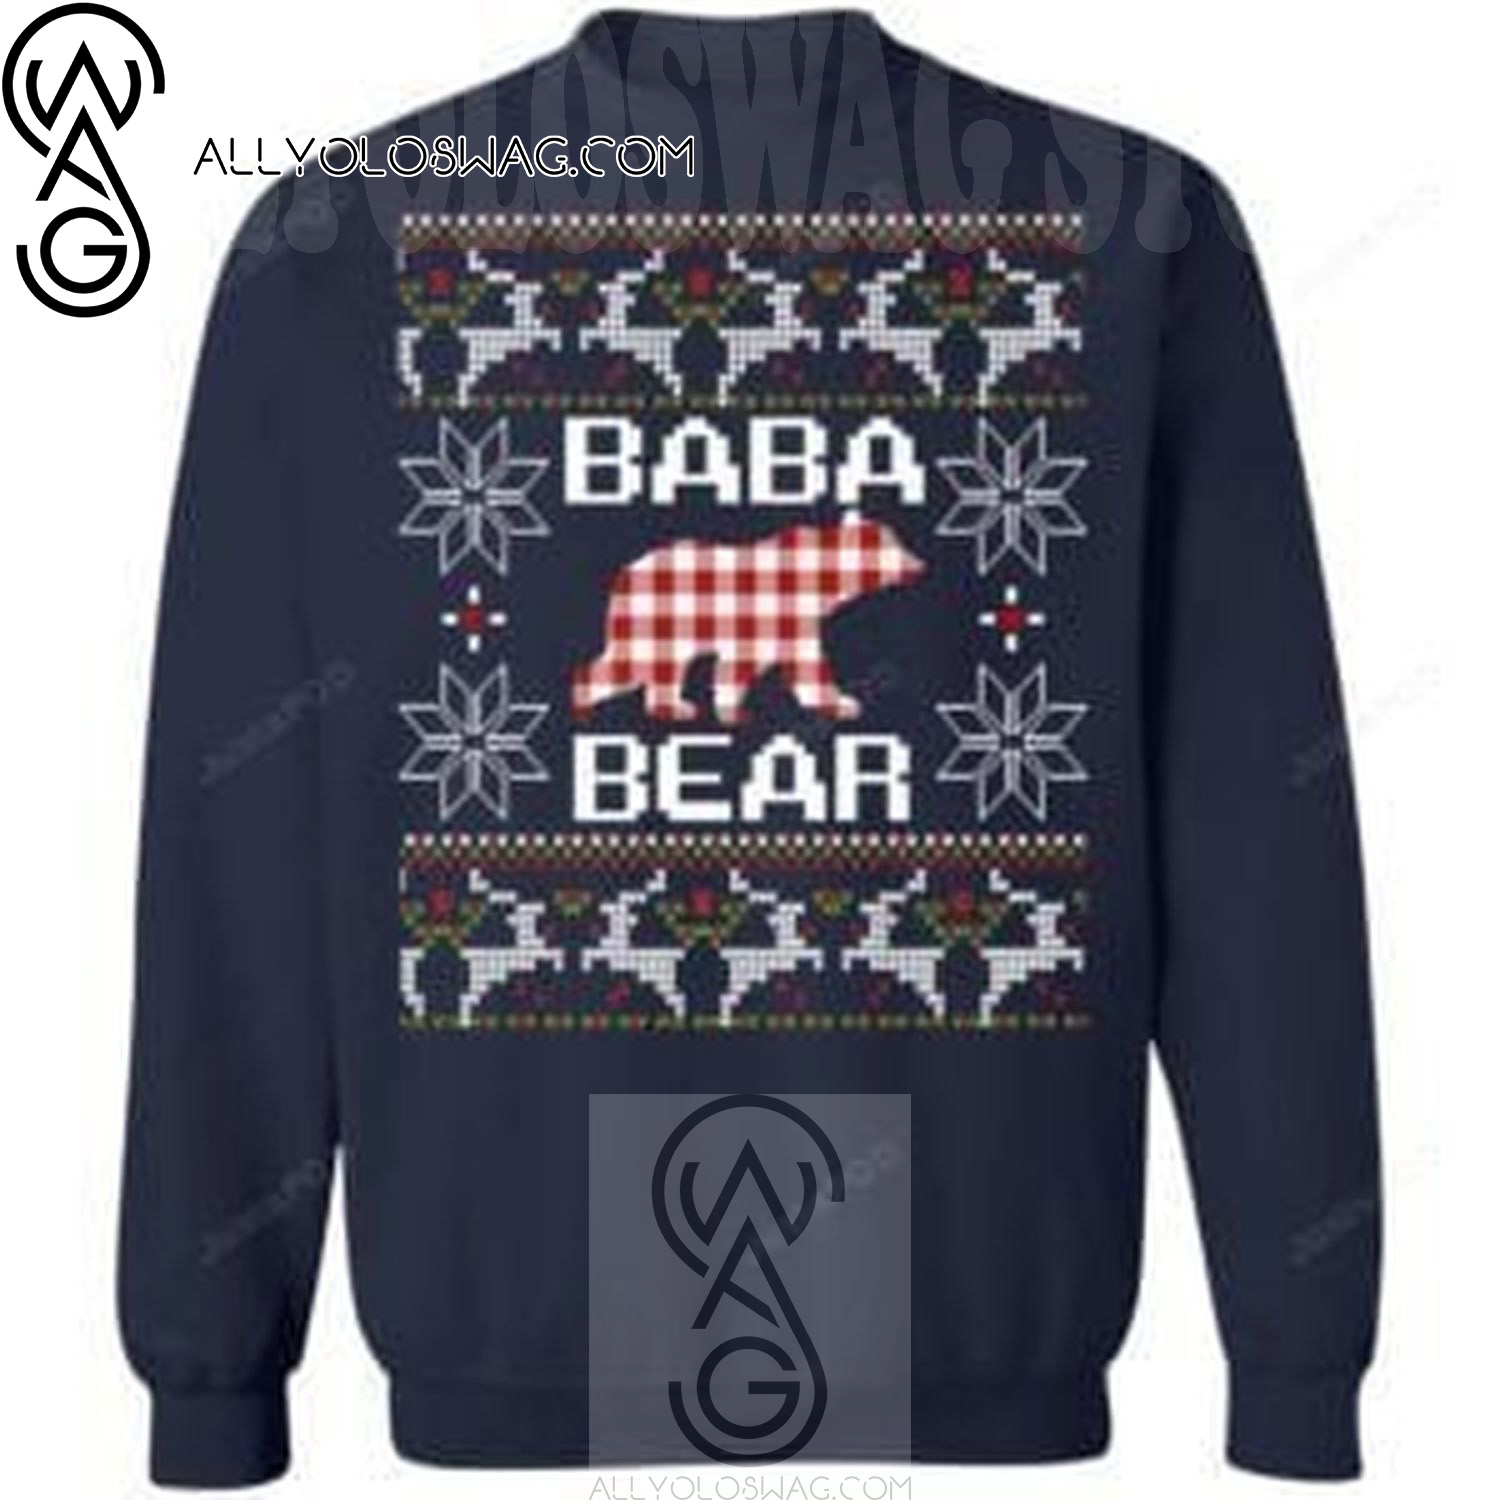 Baba Chinese Bear Holiday Party Ugly Christmas Sweater